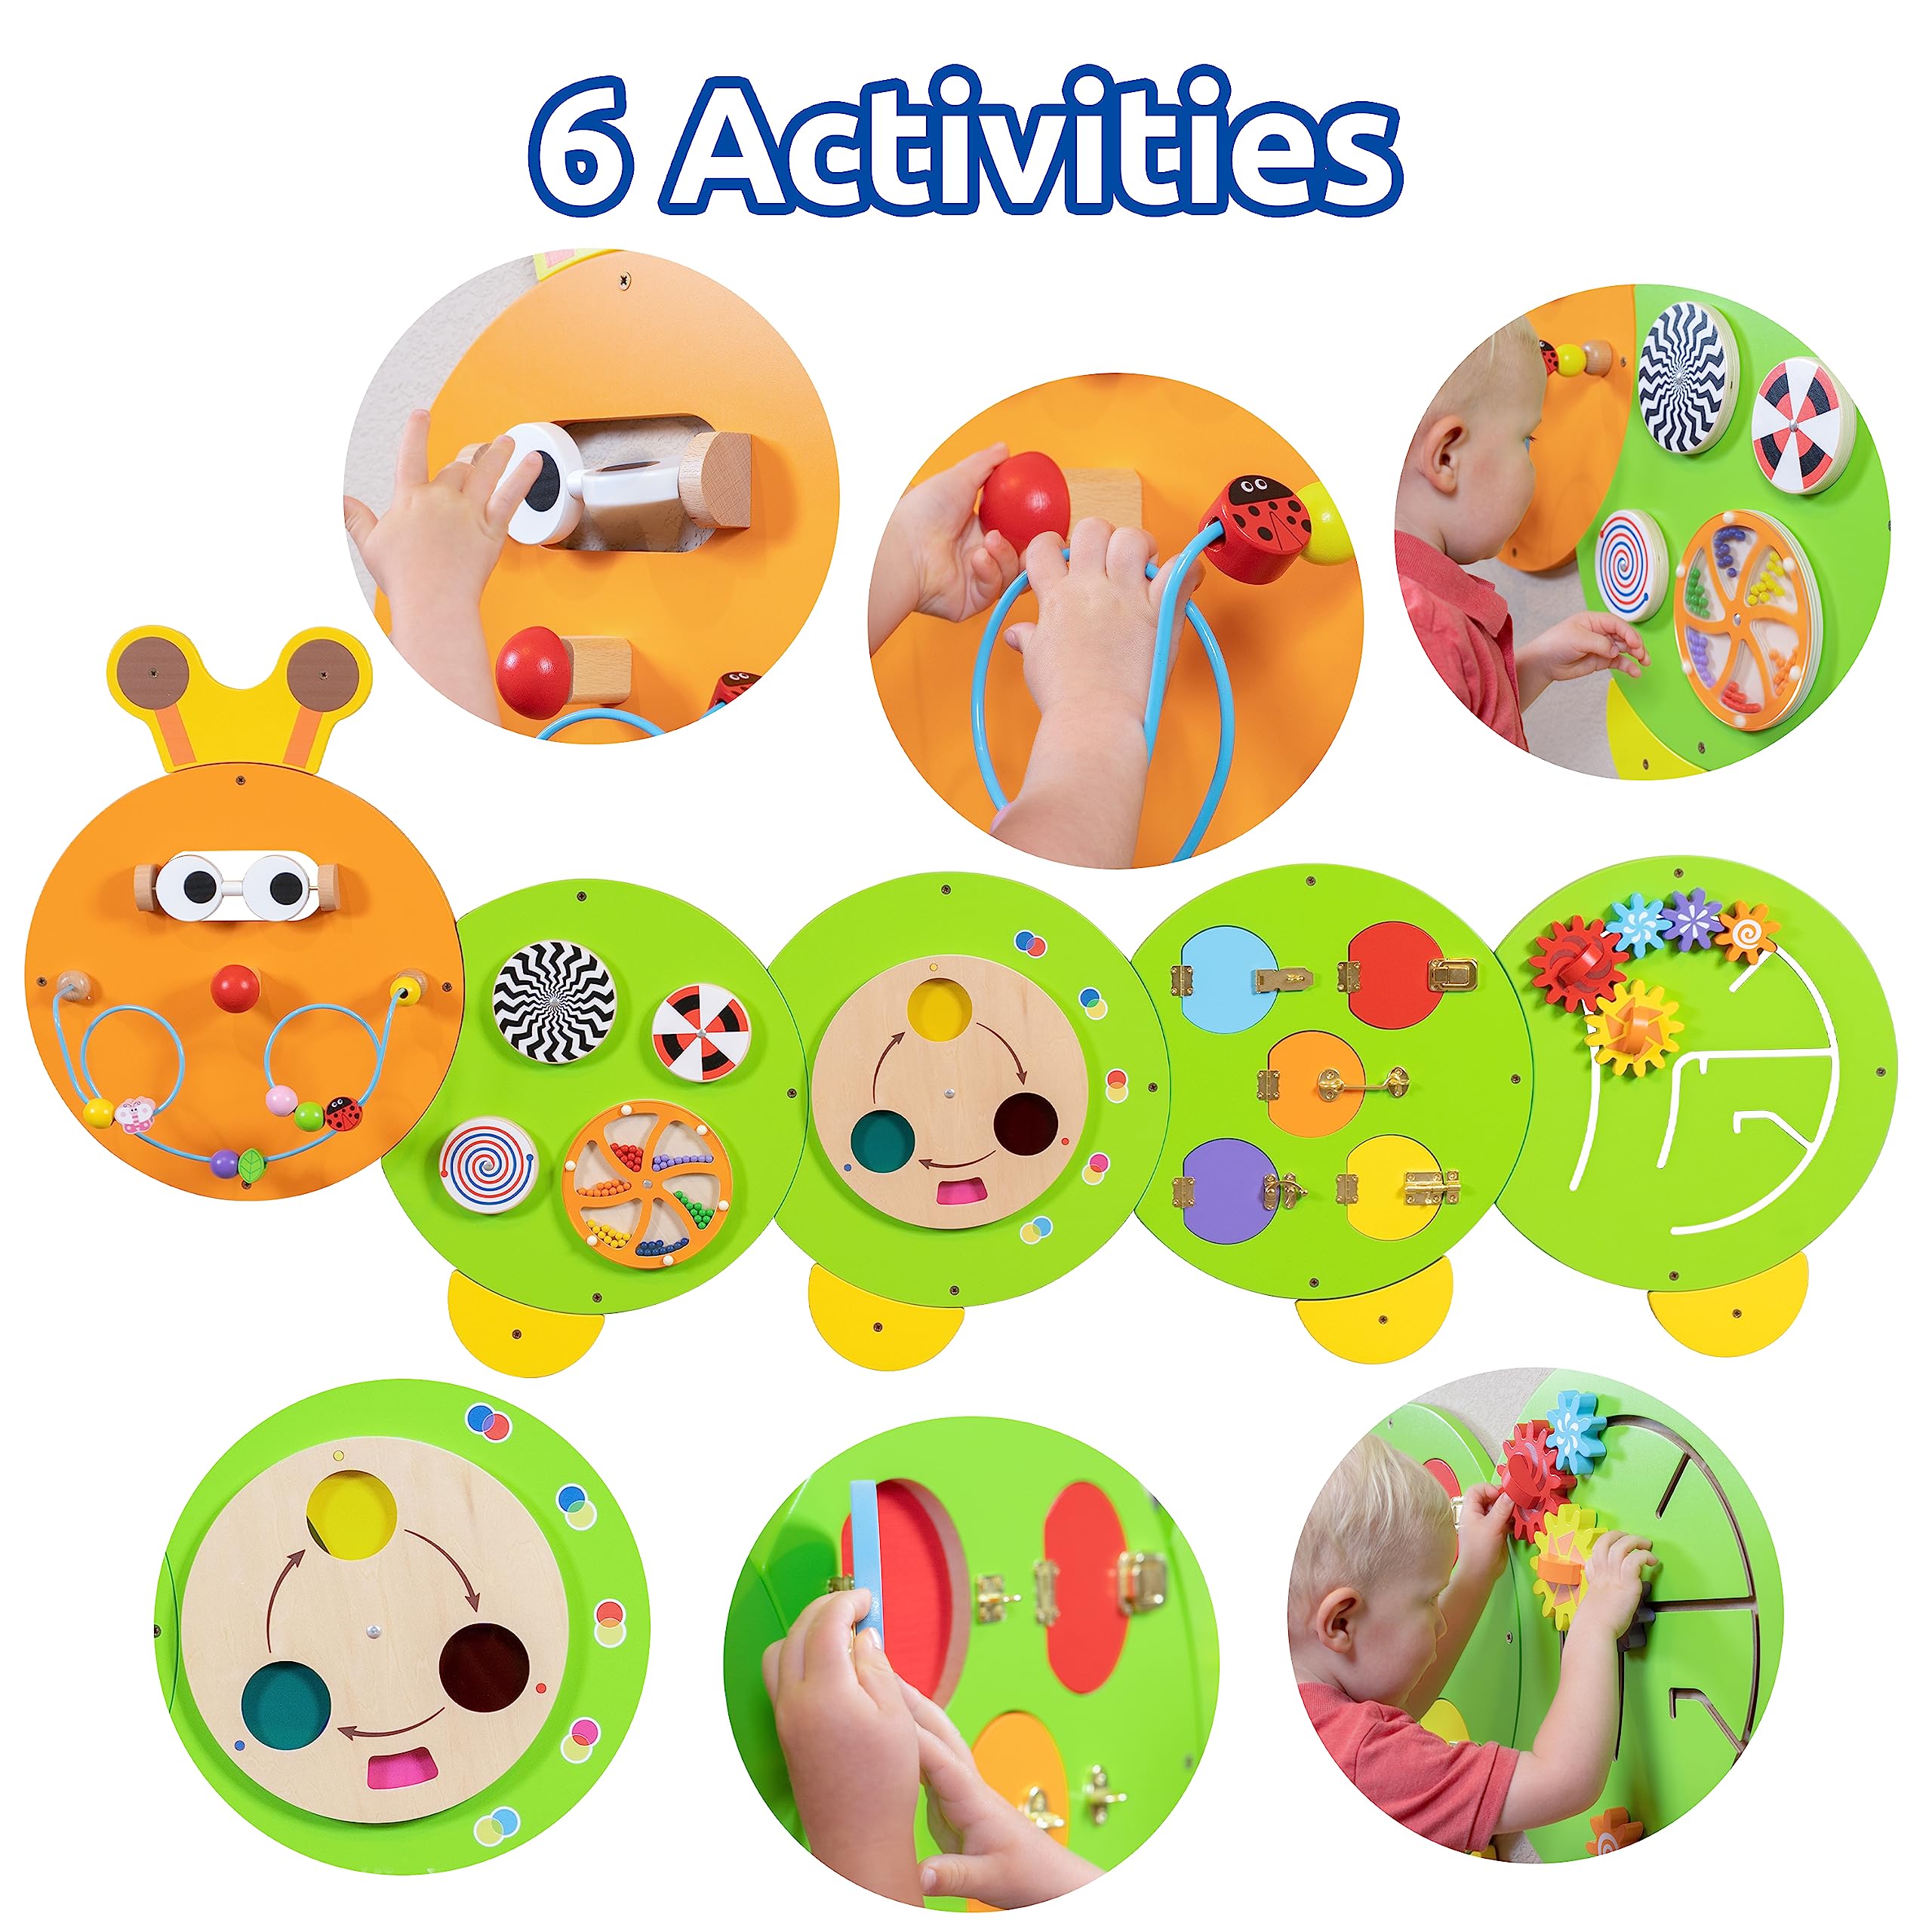 SPARK & WOW Caterpillar Activity Wall Panels - Ages 18m+ - Montessori Sensory Wall Toy - 6 Activities - Busy Board - Toddler Room Decor